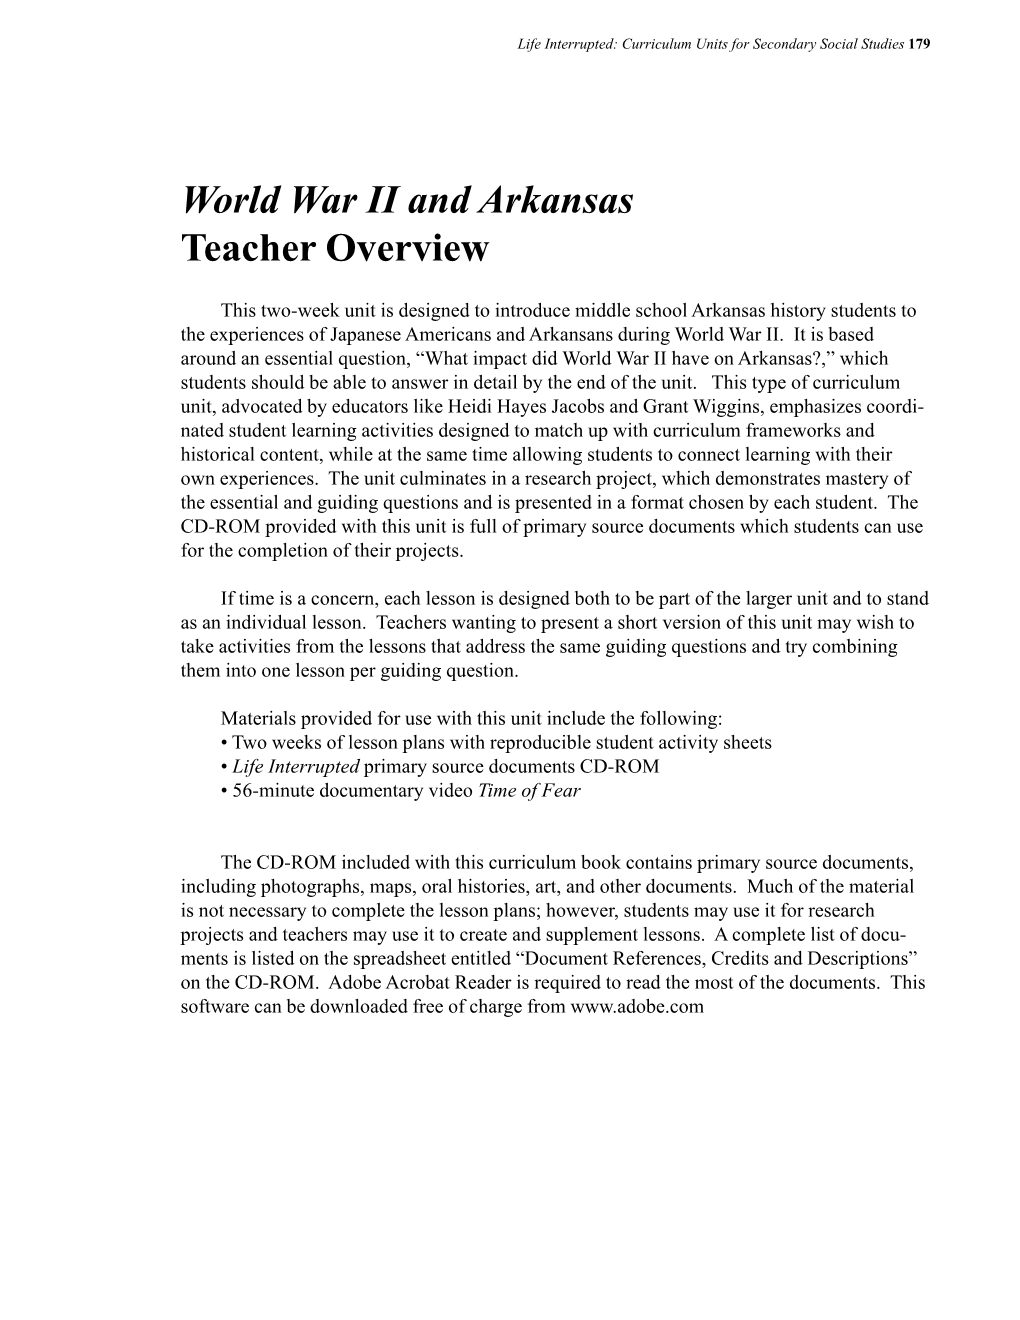 Download the Entire WWII and Arkansas Curriculum (PDF)